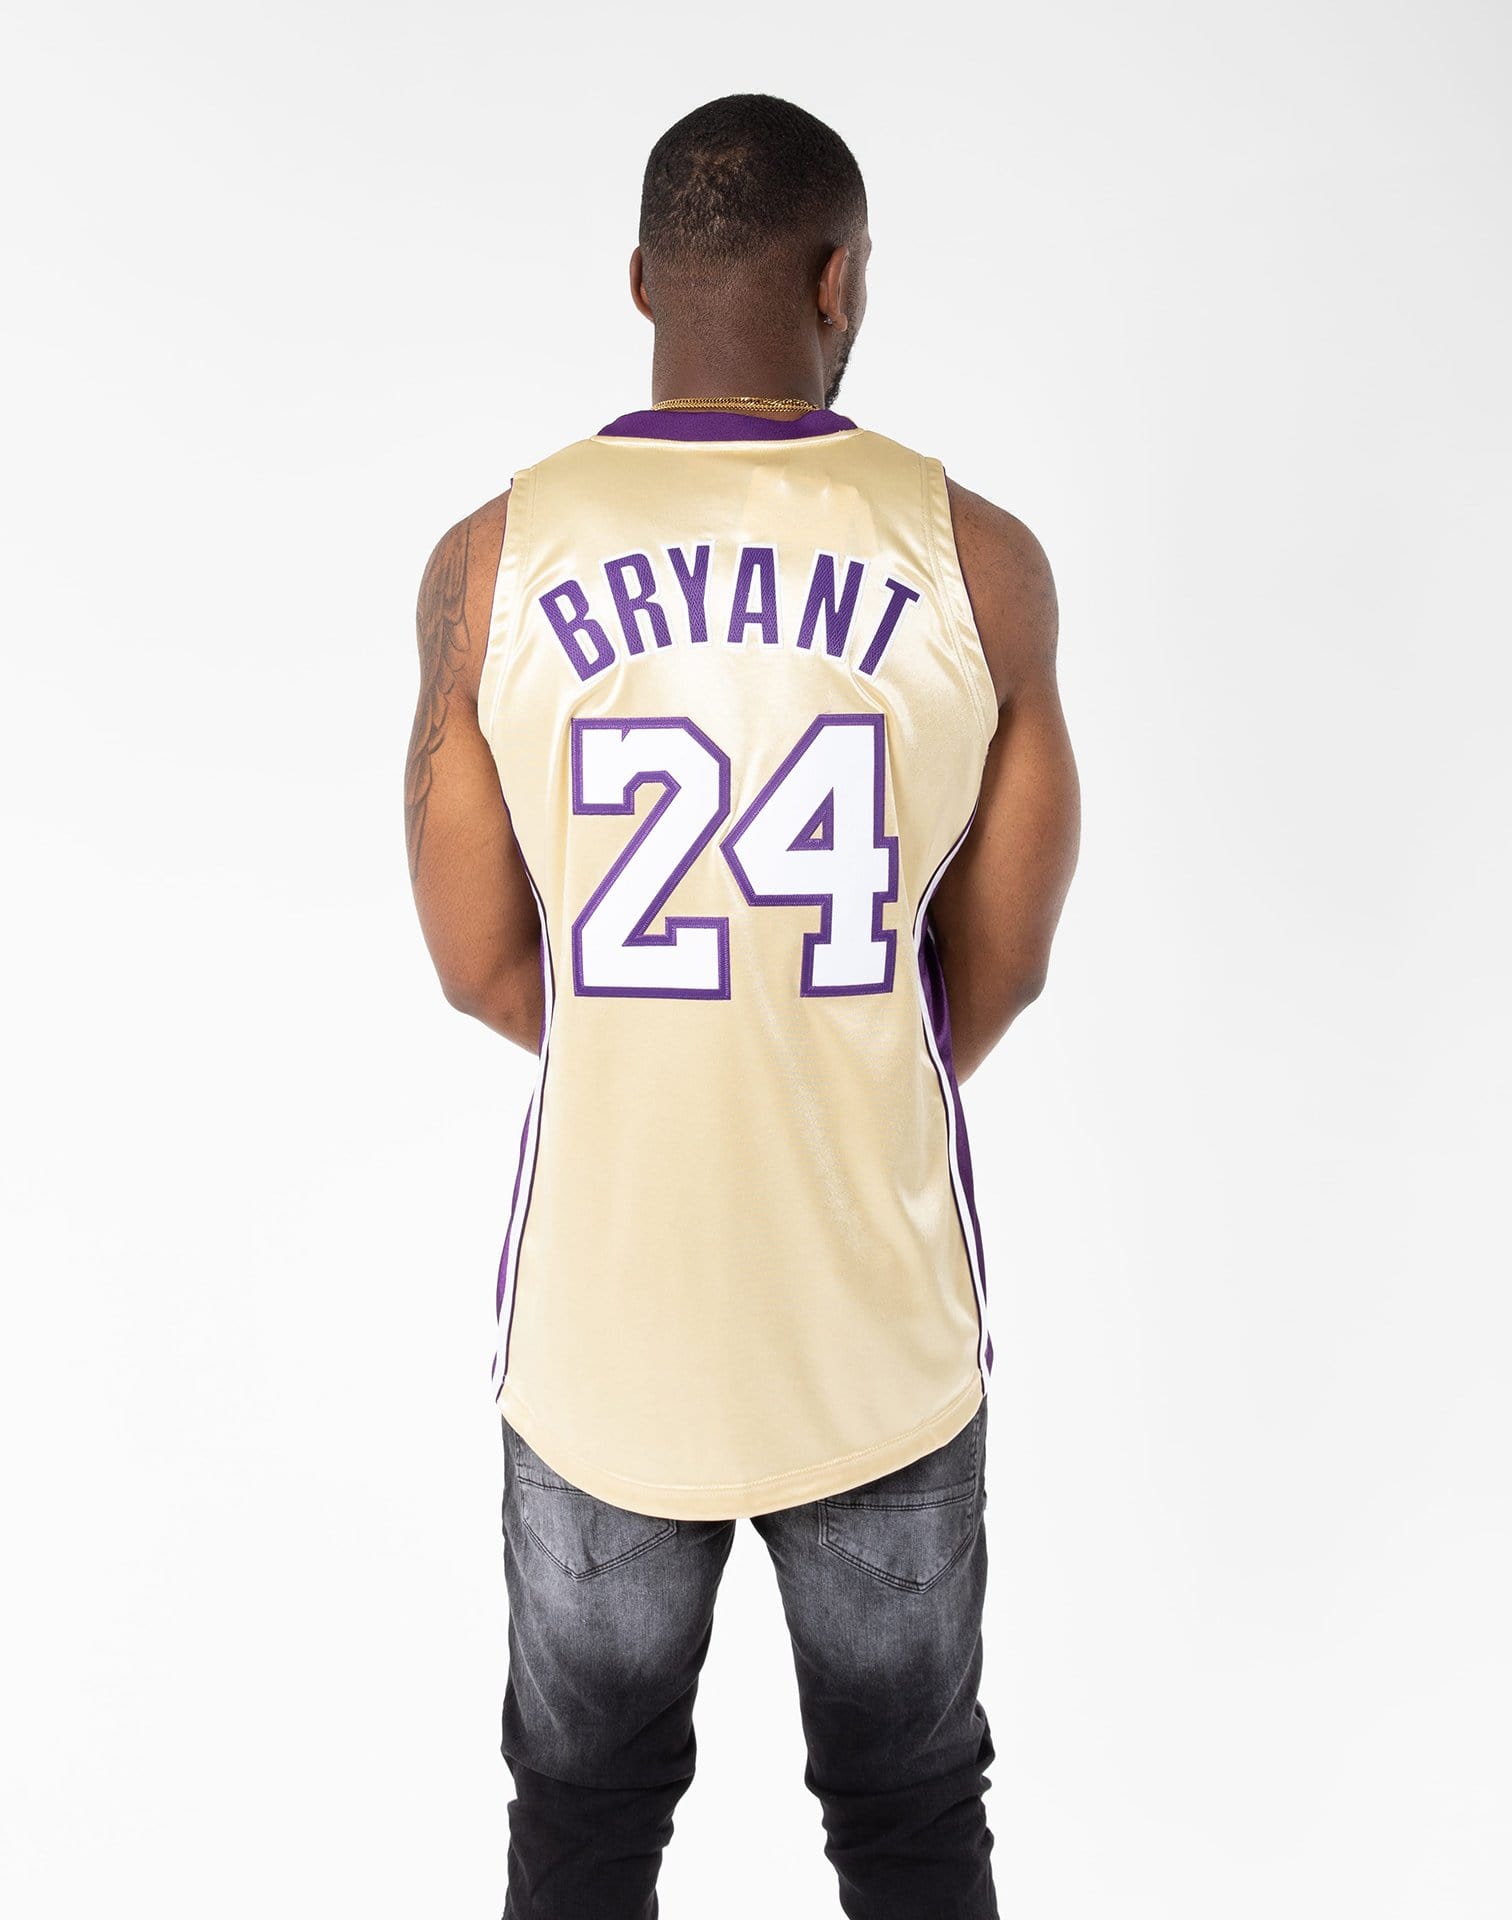 SNKR_TWITR on X: $208 each for the Mitchell and Ness Kobe Bryant